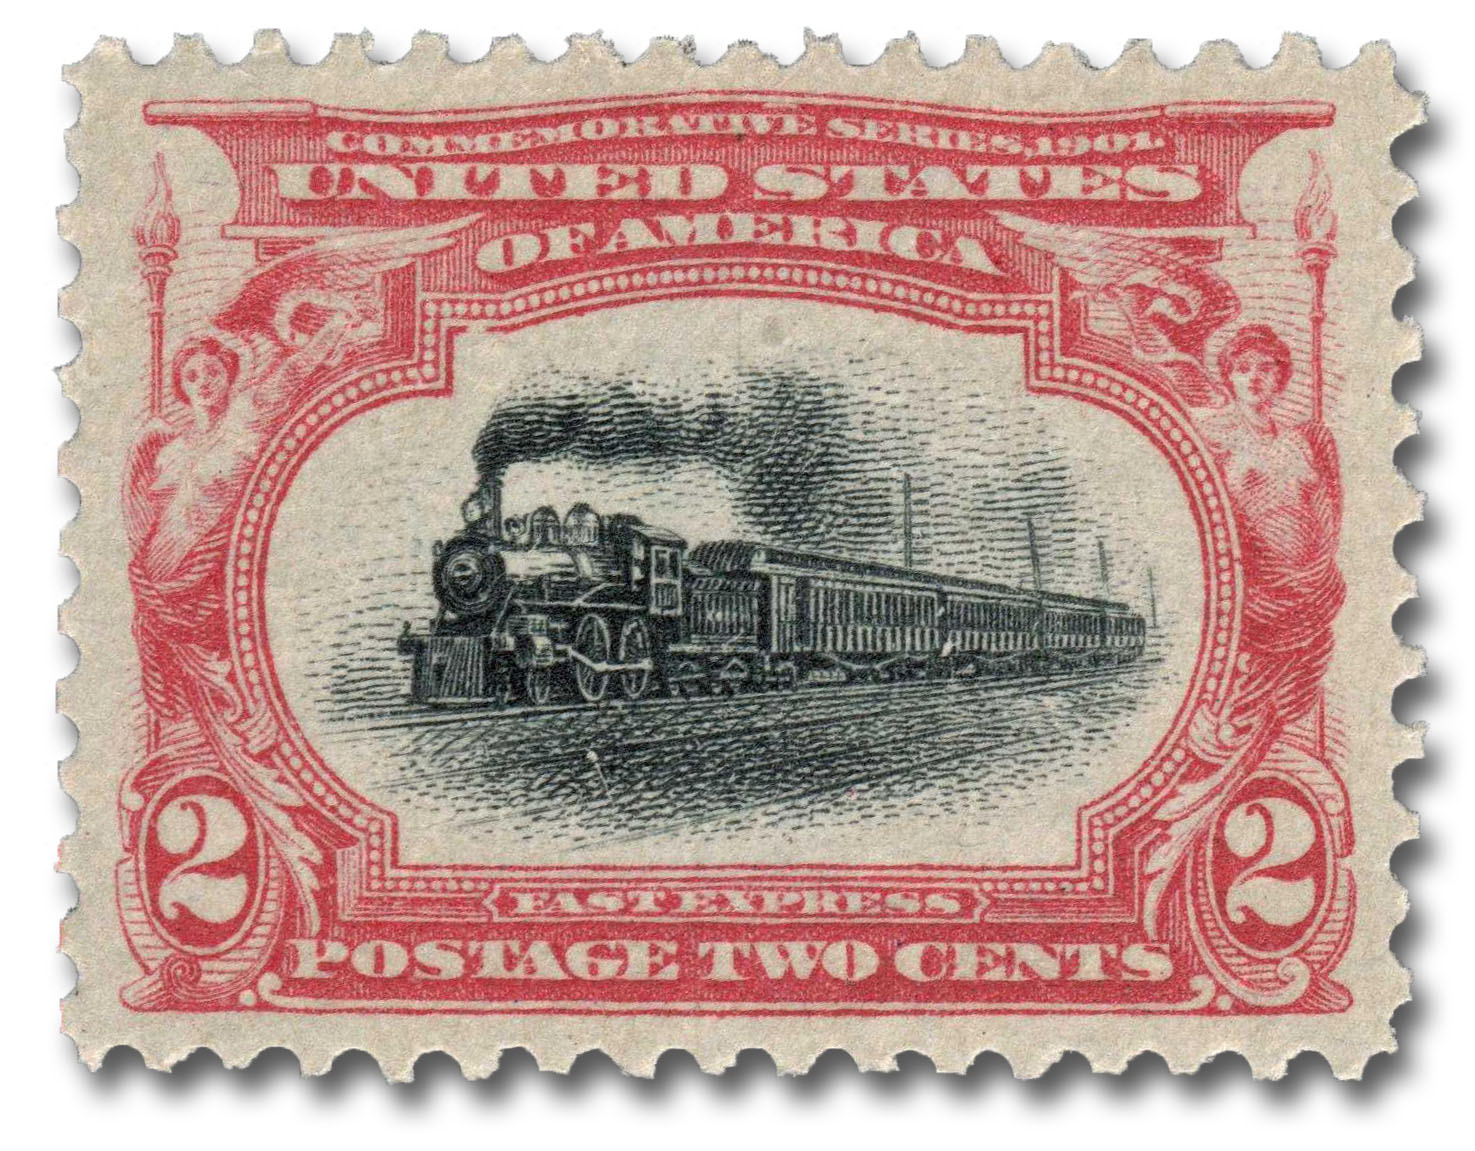 1901 2¢ Pan-American Exposition: Empire State Express stamp